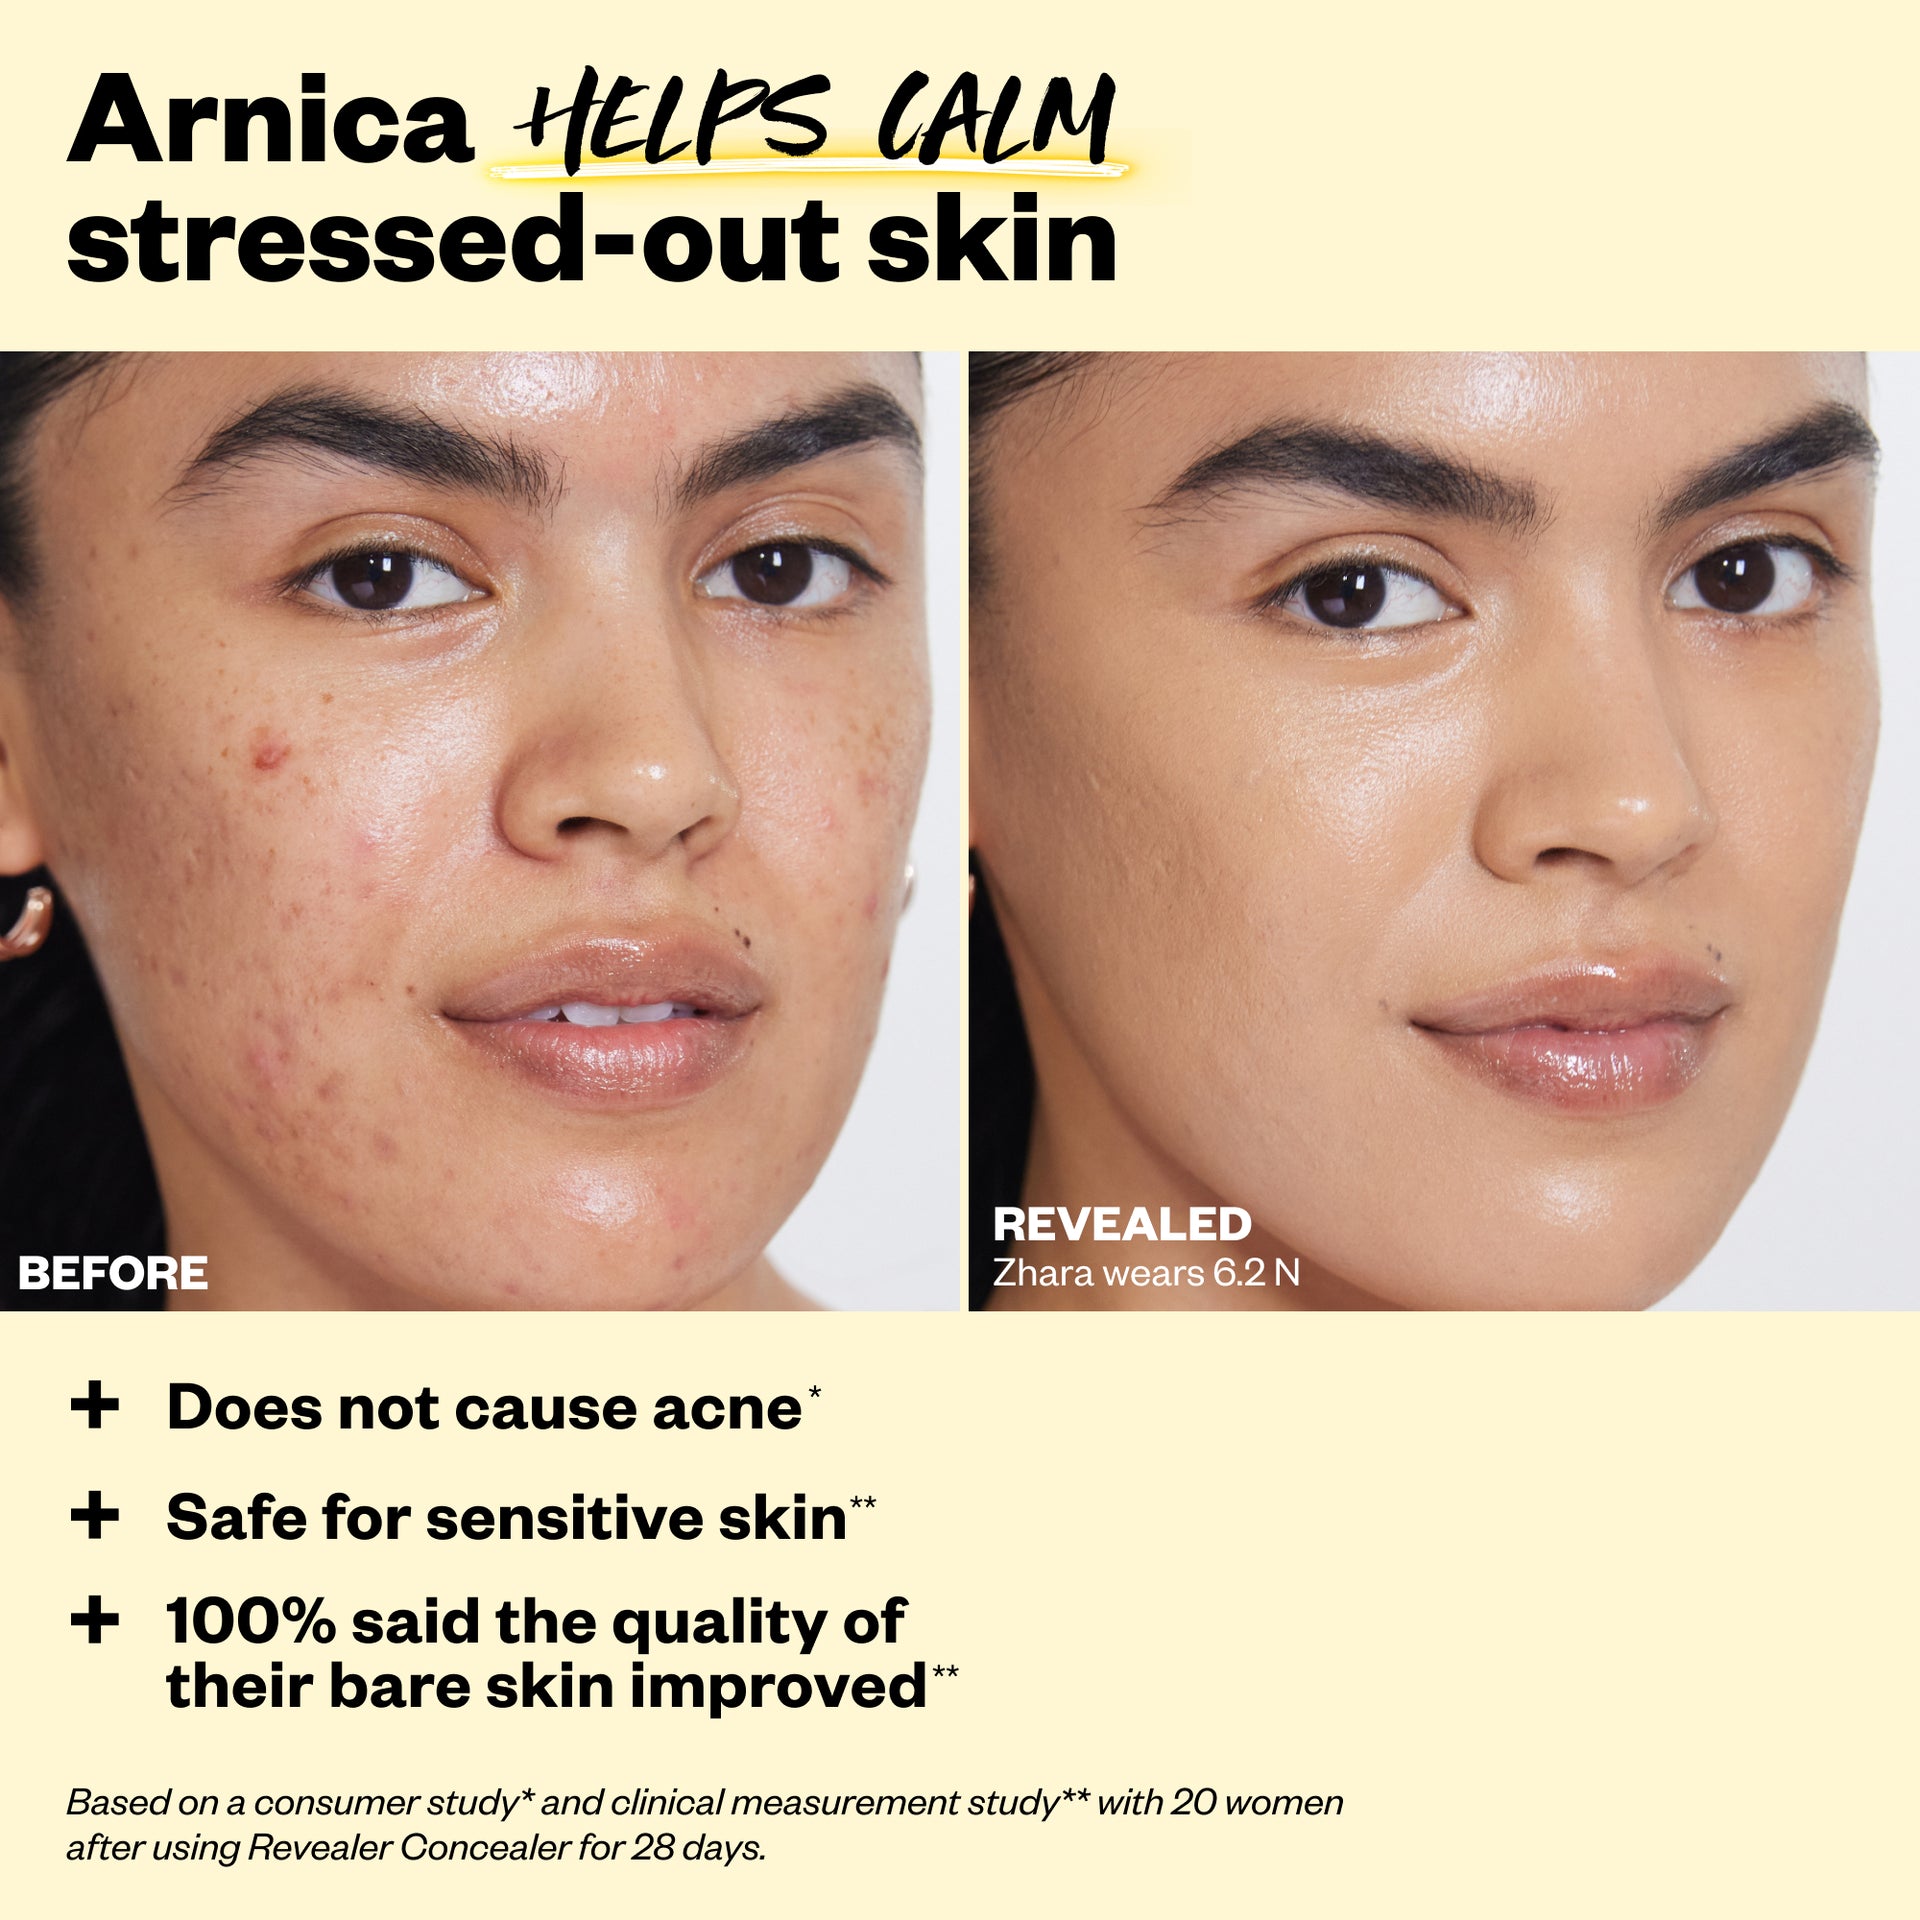 Arnica helps calm stressed-out skin. Does not cause acne, safe for sensitive skin, 100% said the quality of their bare skin improved.